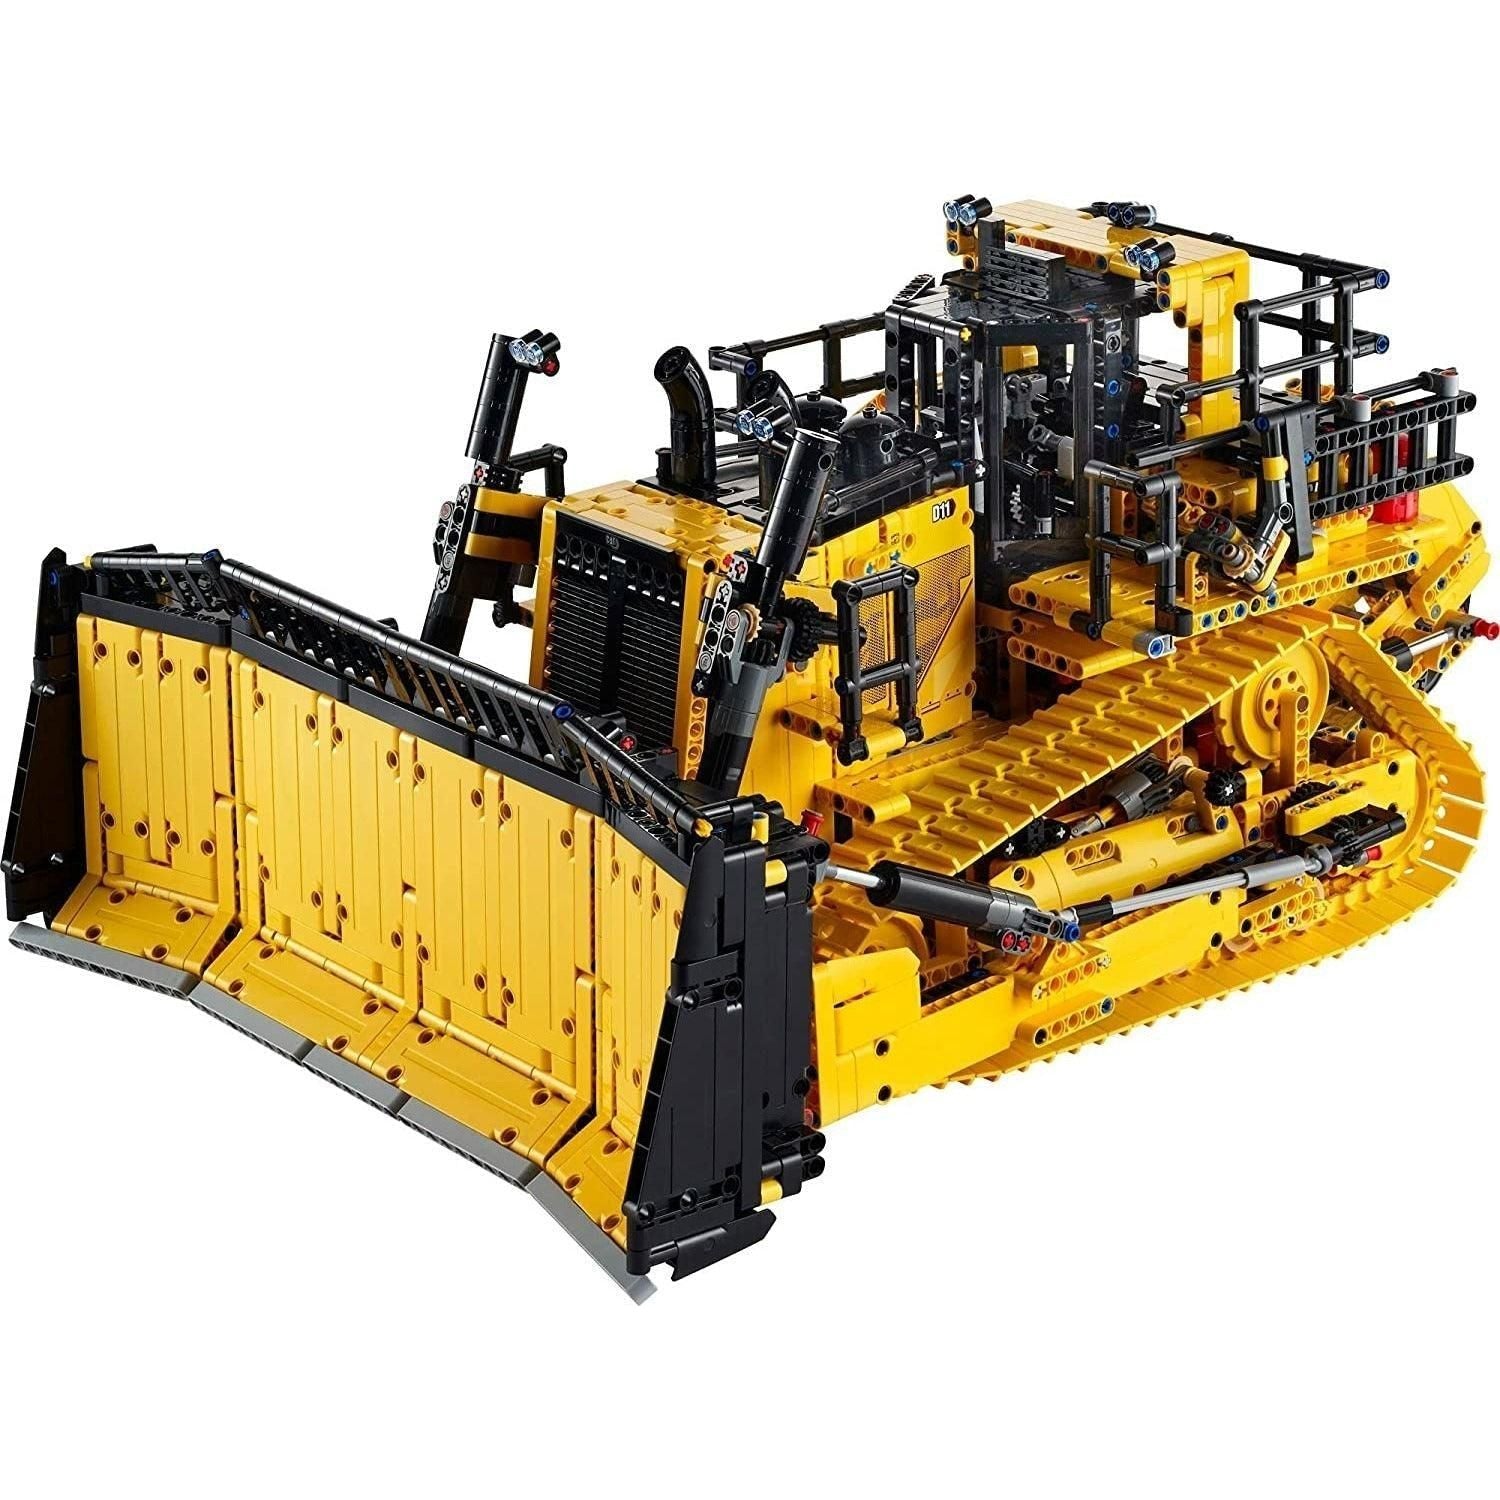 LEGO Technic App-Controlled Cat D11 Bulldozer 42131; A True-to-Life Replica of an Iconic Construction Machine (3,854 Pieces) - BumbleToys - 18+, Boys, LEGO, OXE, Pre-Order, Technic